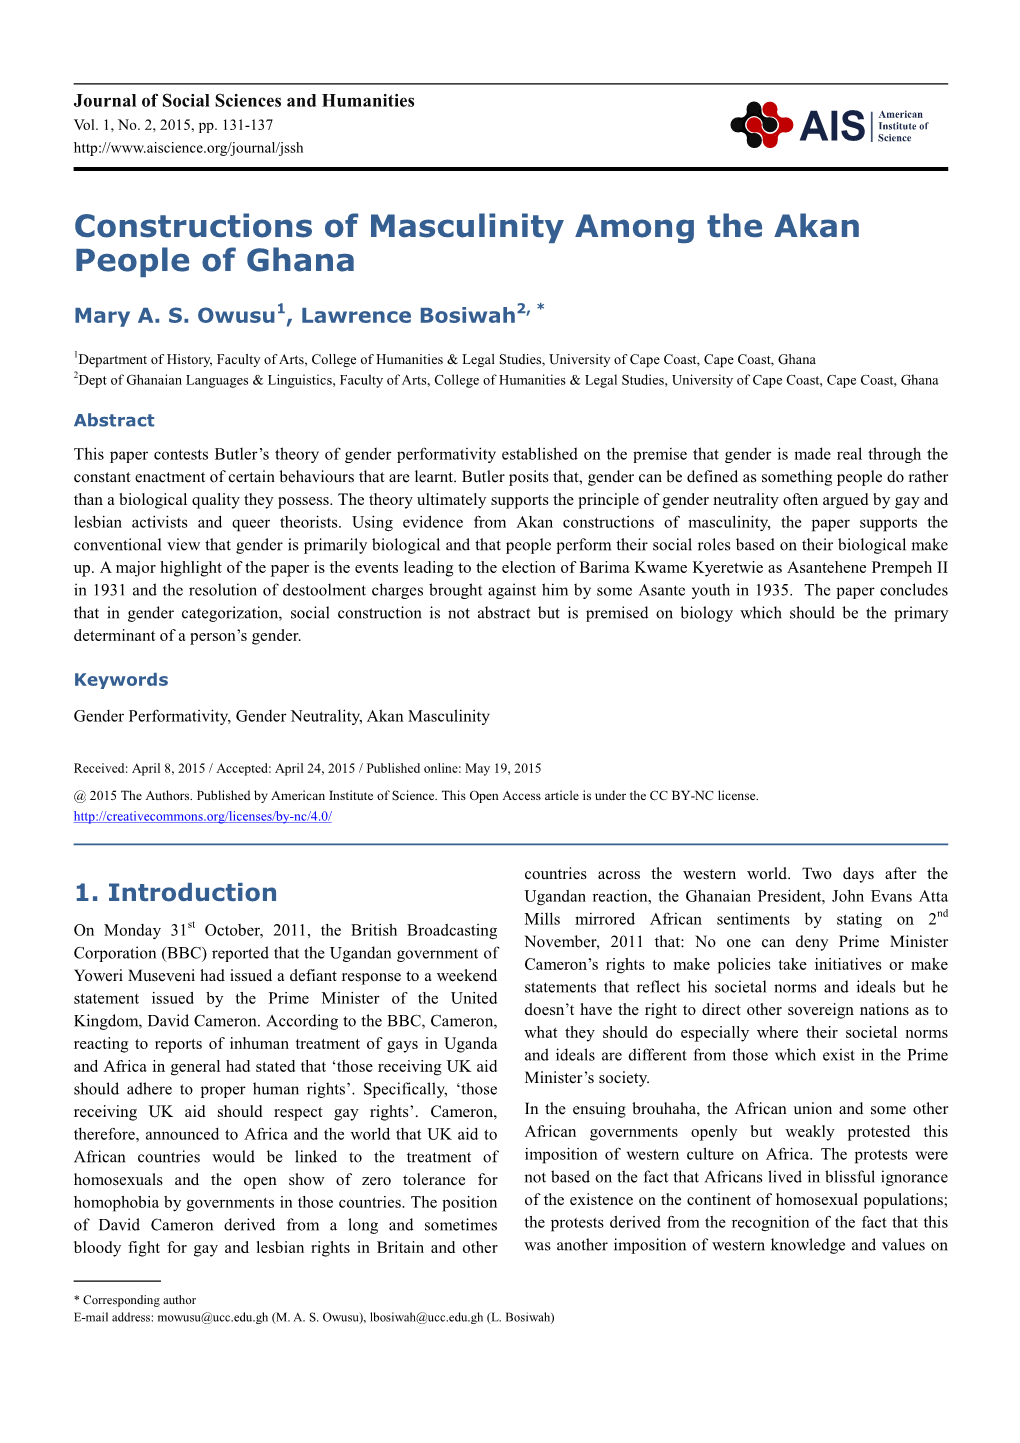 Constructions of Masculinity Among the Akan People of Ghana